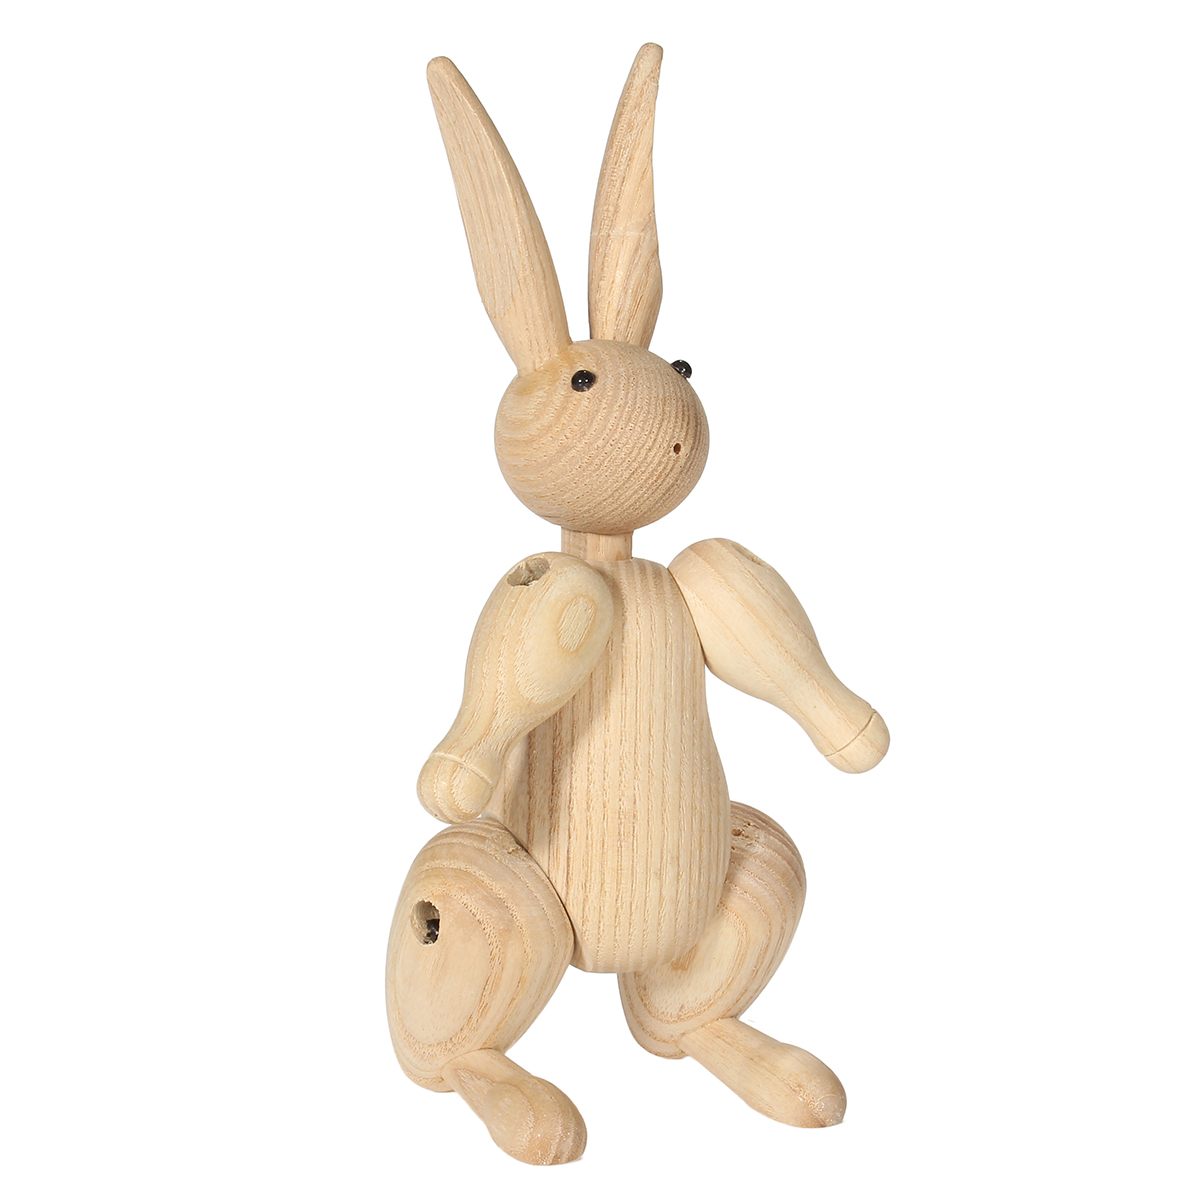 Wood-Carving-Miss-Rabbit-Figurines-Joints-Puppets-Animal-Art-Home-Decoration-Crafts-1241724-1